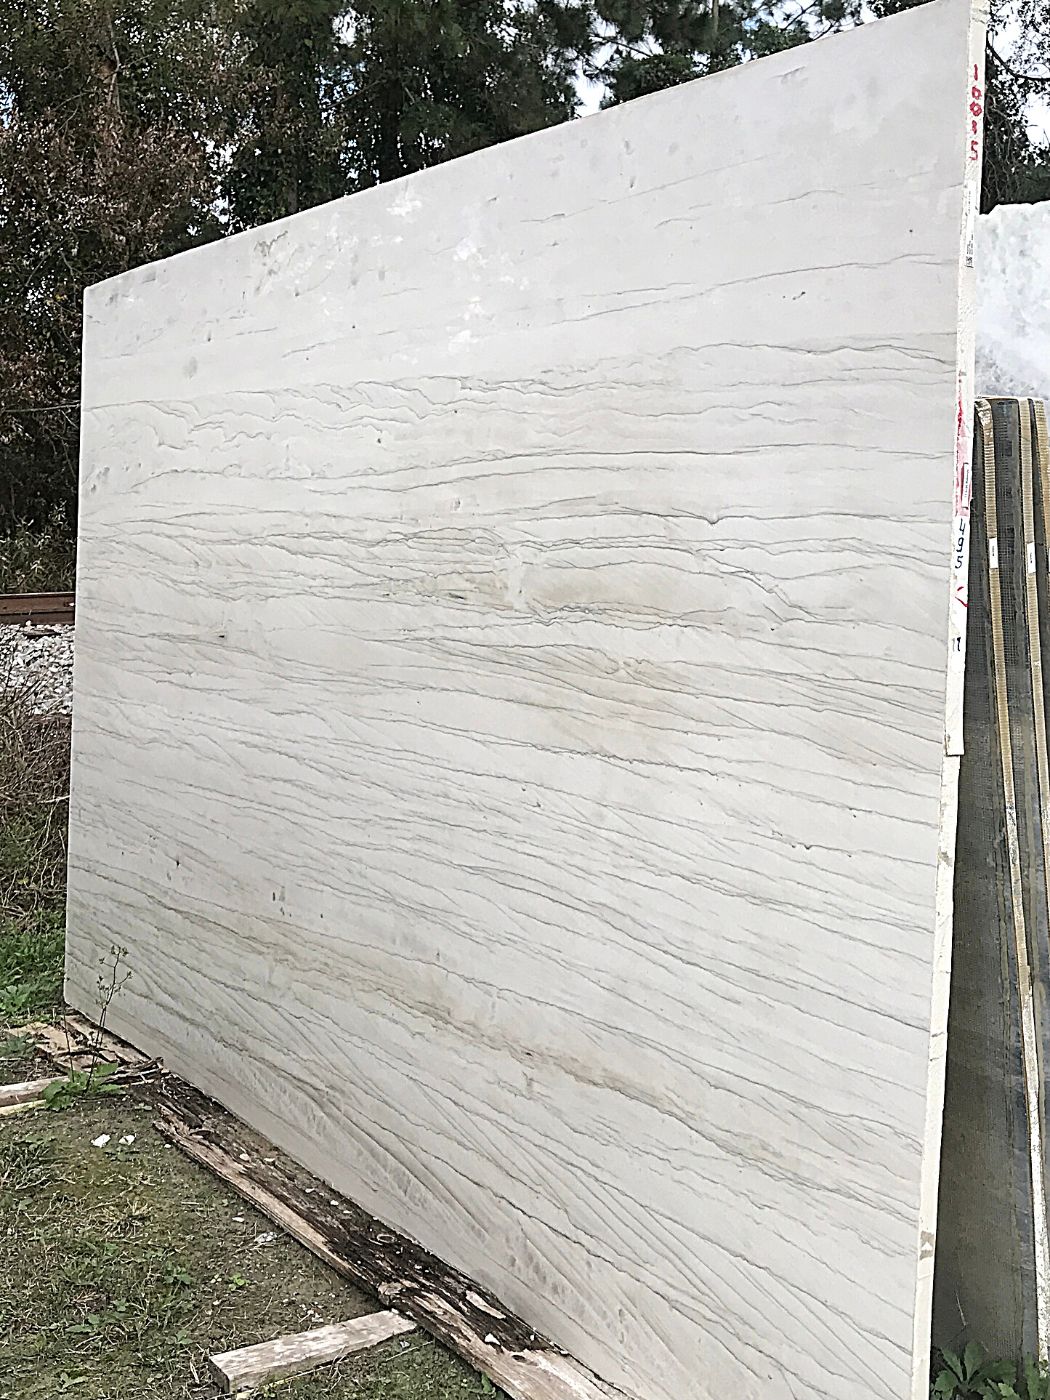 Slab of white mustang quartzite I selected for the island countertop